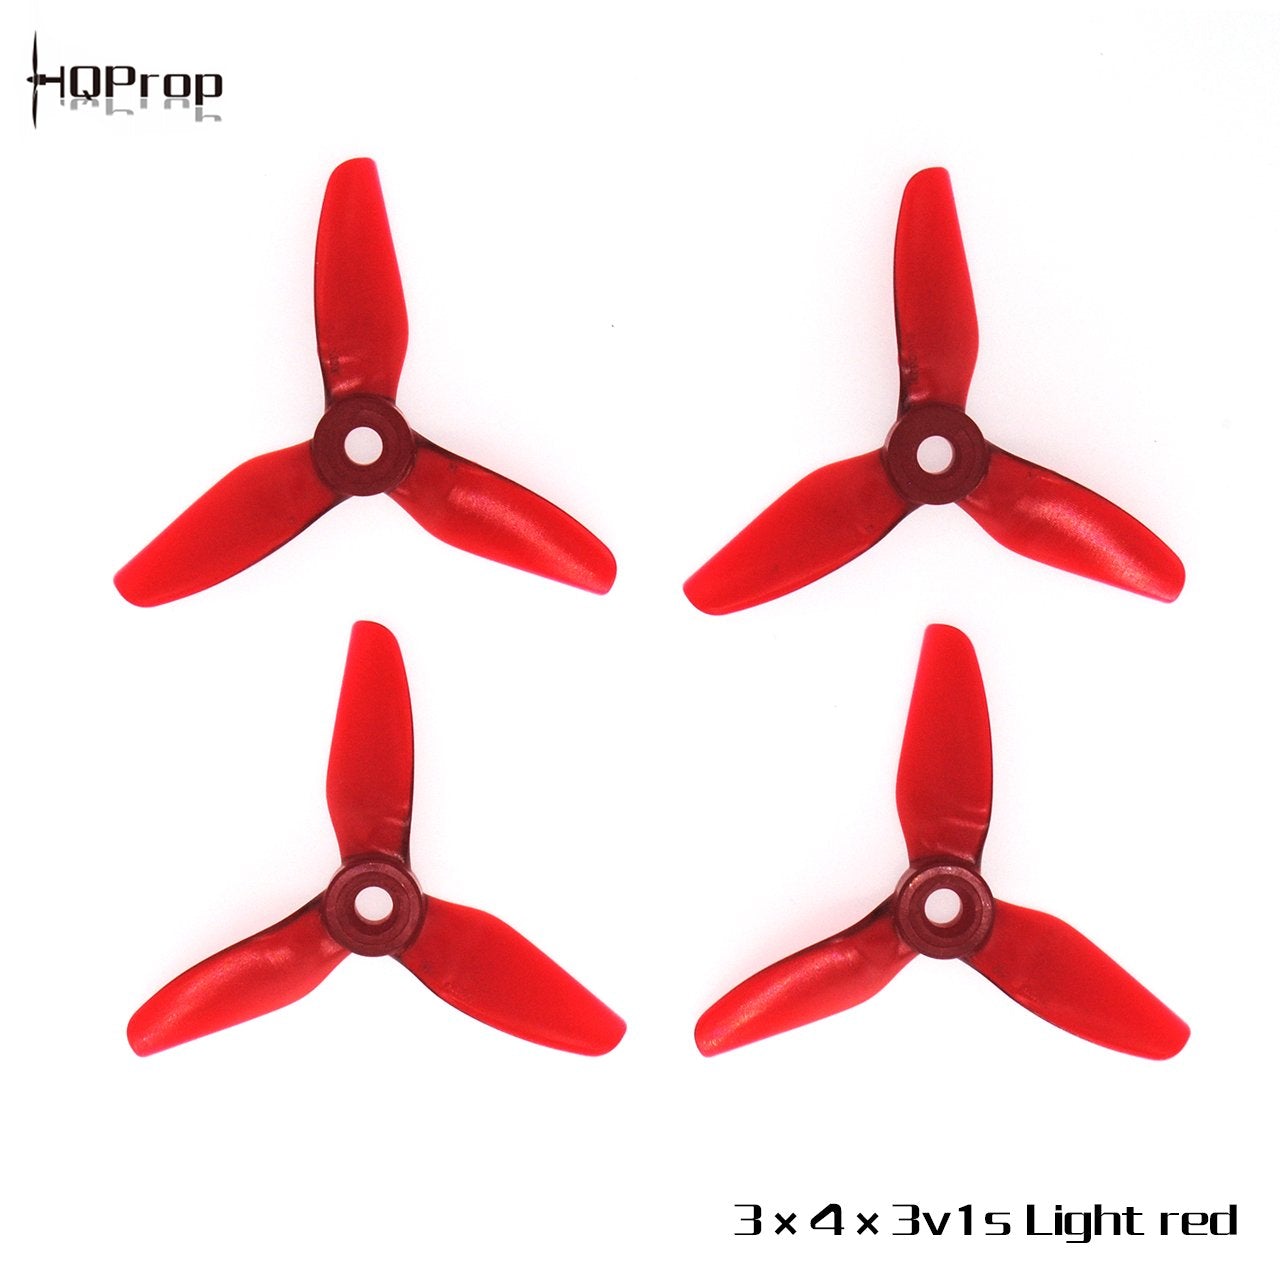 HQProp 3X4X3V1S Tri-Blade 3 inch Propellers 3 - HQProp - Drone Authority